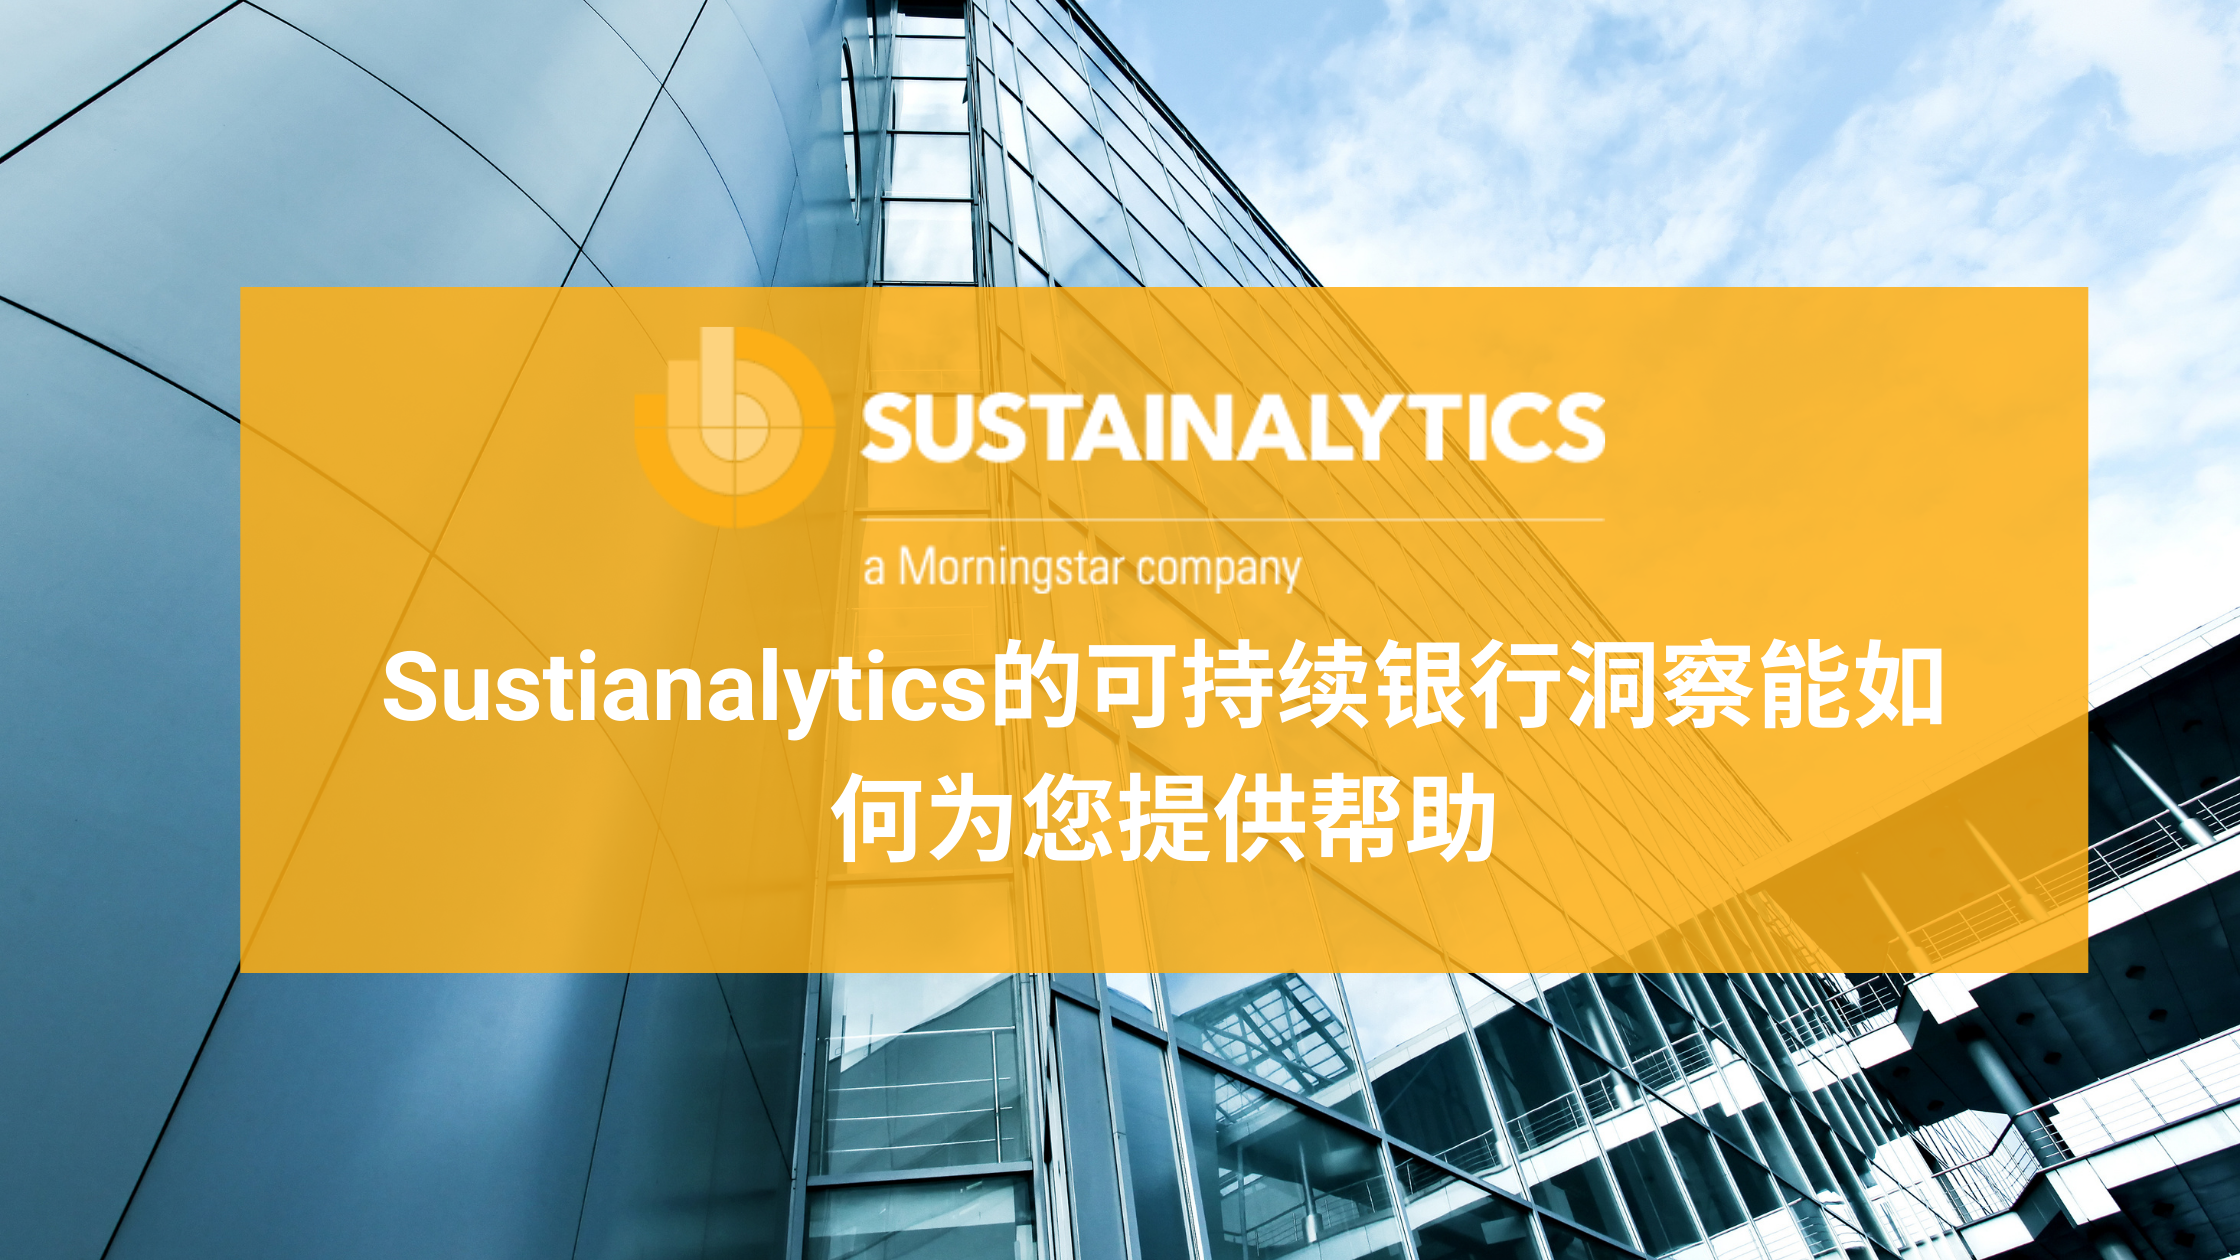 CH sustainable banking insights